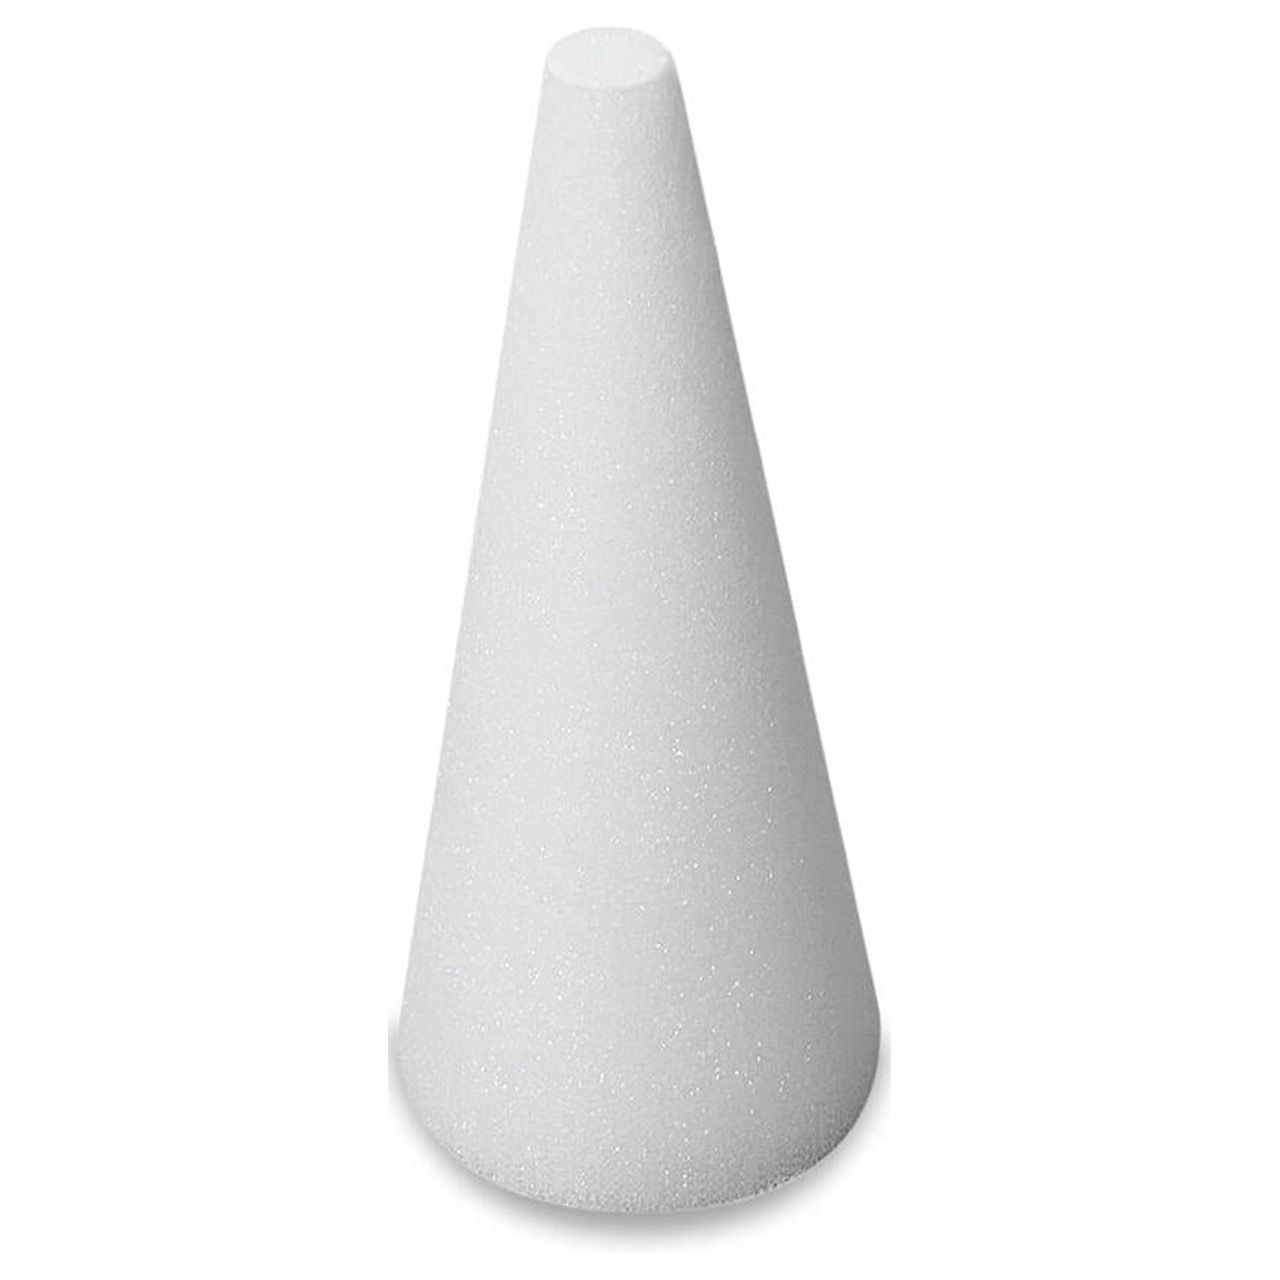 FloraCraft Packaged Styrofoam Cones, 12-Inch-by-4-Inch Cone, White